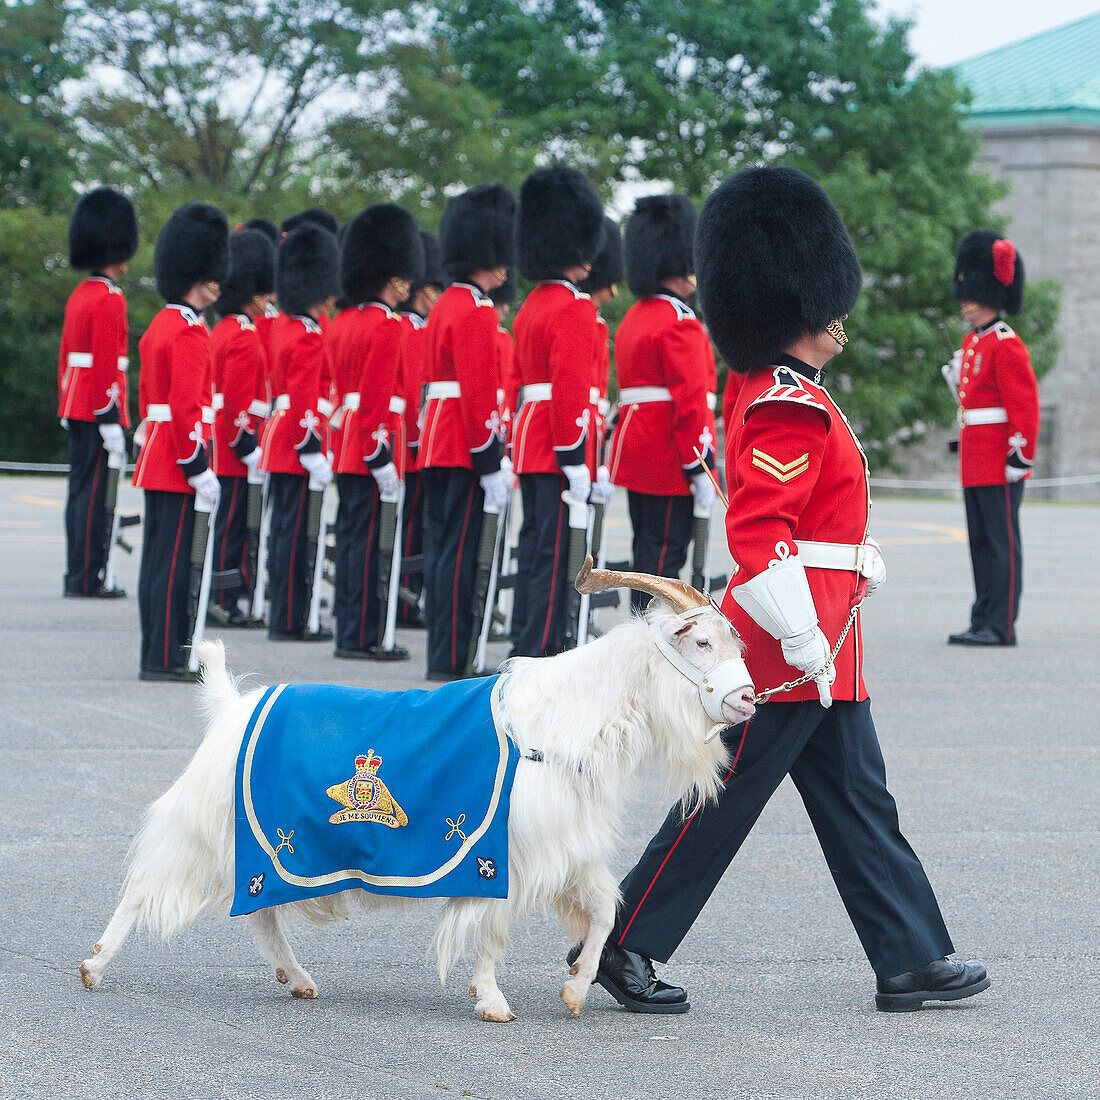 Canada. Province of Quebec. Quebec town. The Citadel shelters the 22nd Royal Regiment, the only French-speaking regiment of Canada. The changing of the guard. The goatherd chief  with the billy goat, the mascot of the regiment